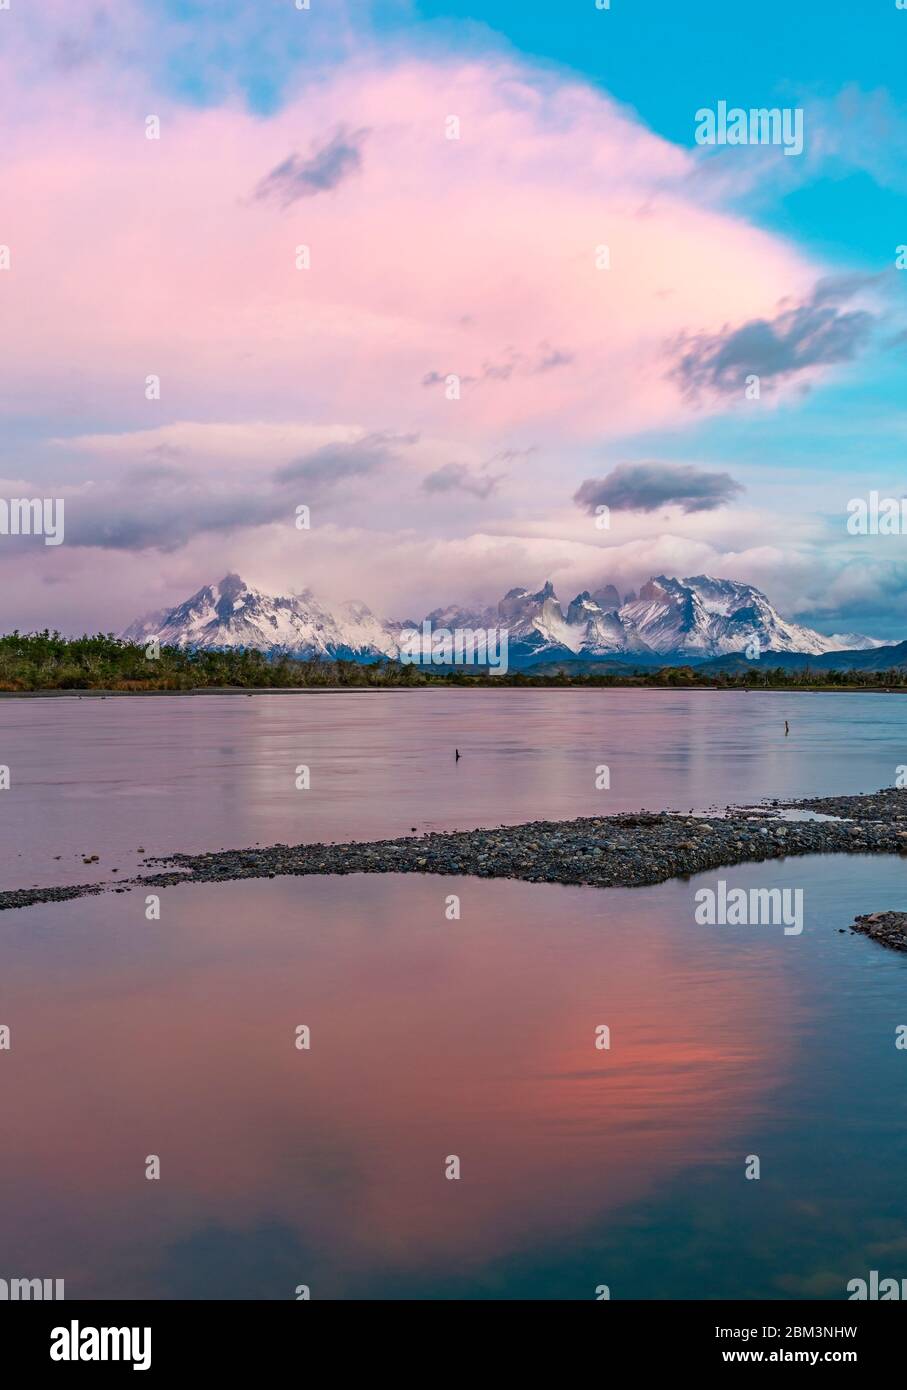 Vertical Sunrise of the Cuernos and Torres del Paine peaks along the Serrano River, Torres del Paine national park, Patagonia, Chile. Stock Photo